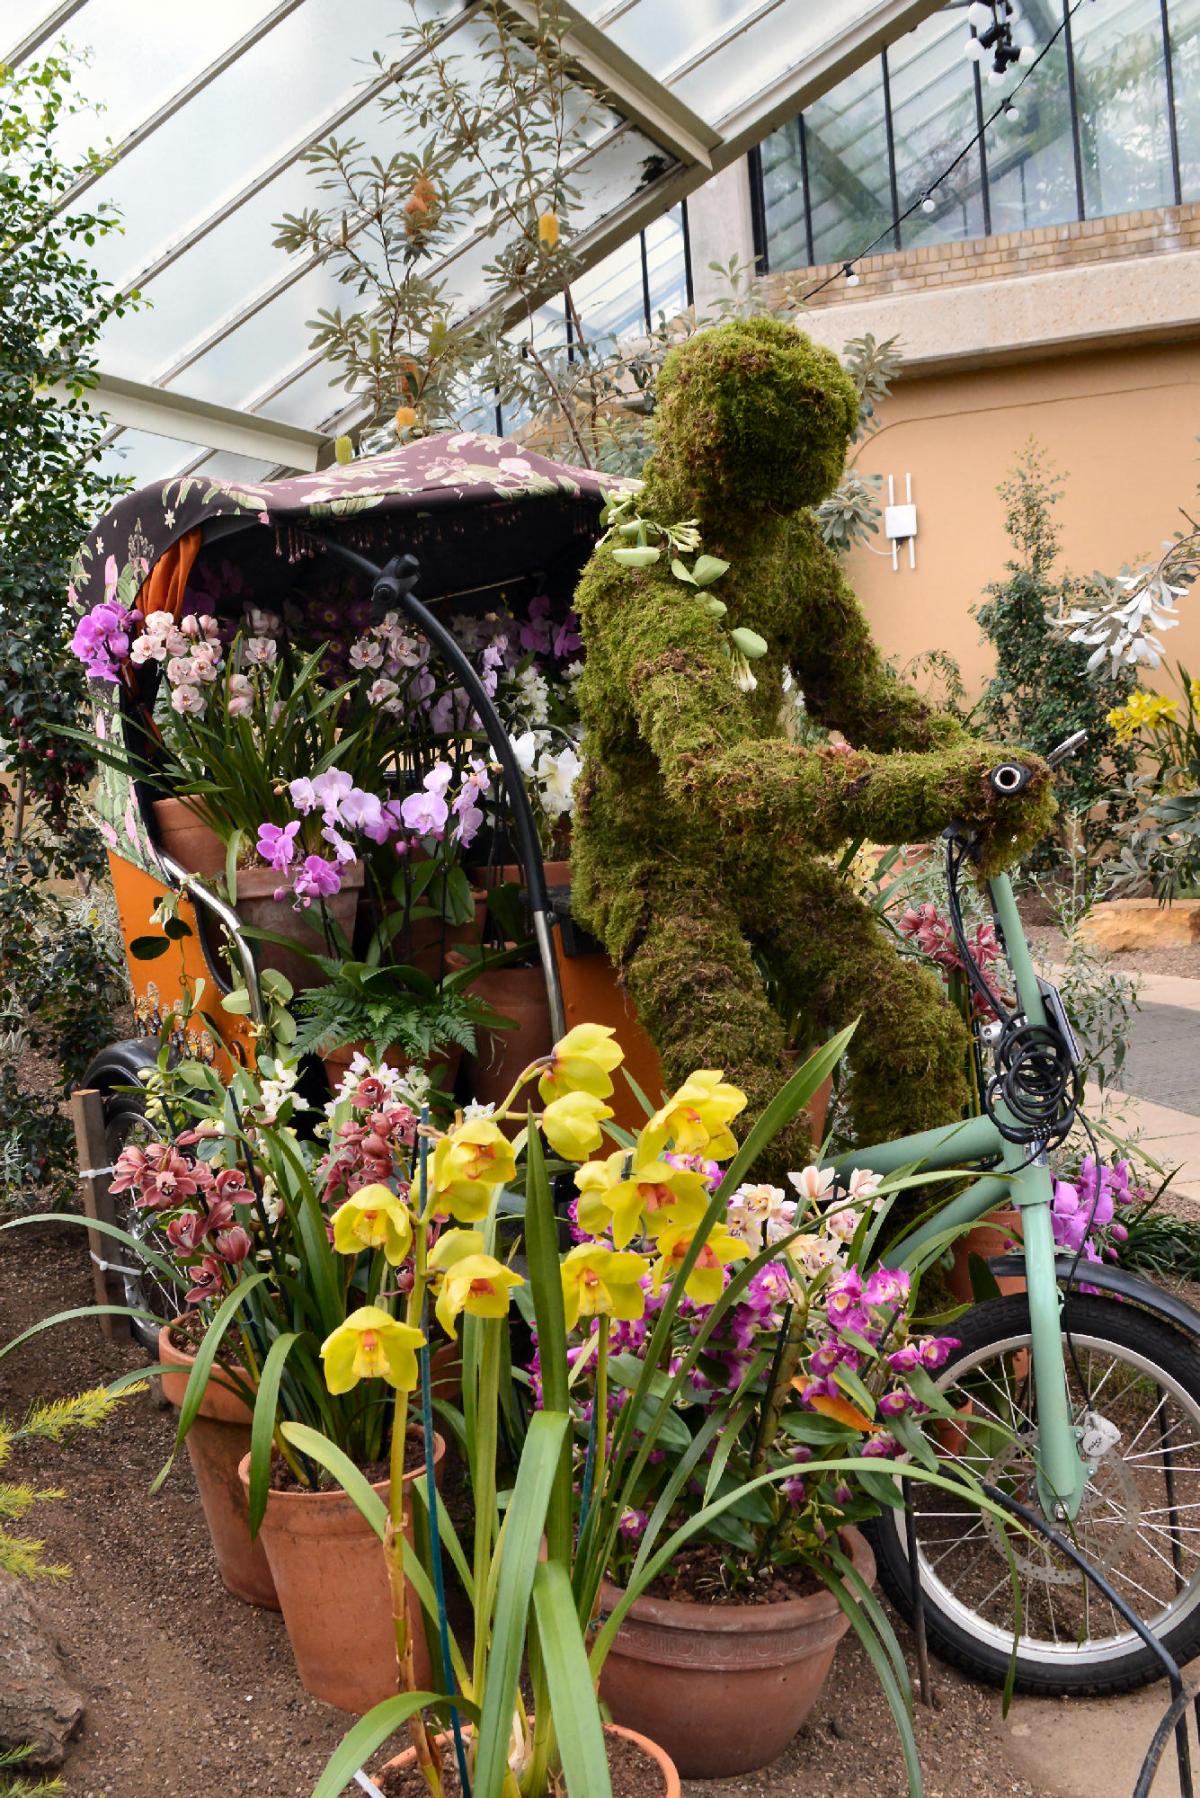 Andy Scott sent in this photo of the Kew Orchid Festival